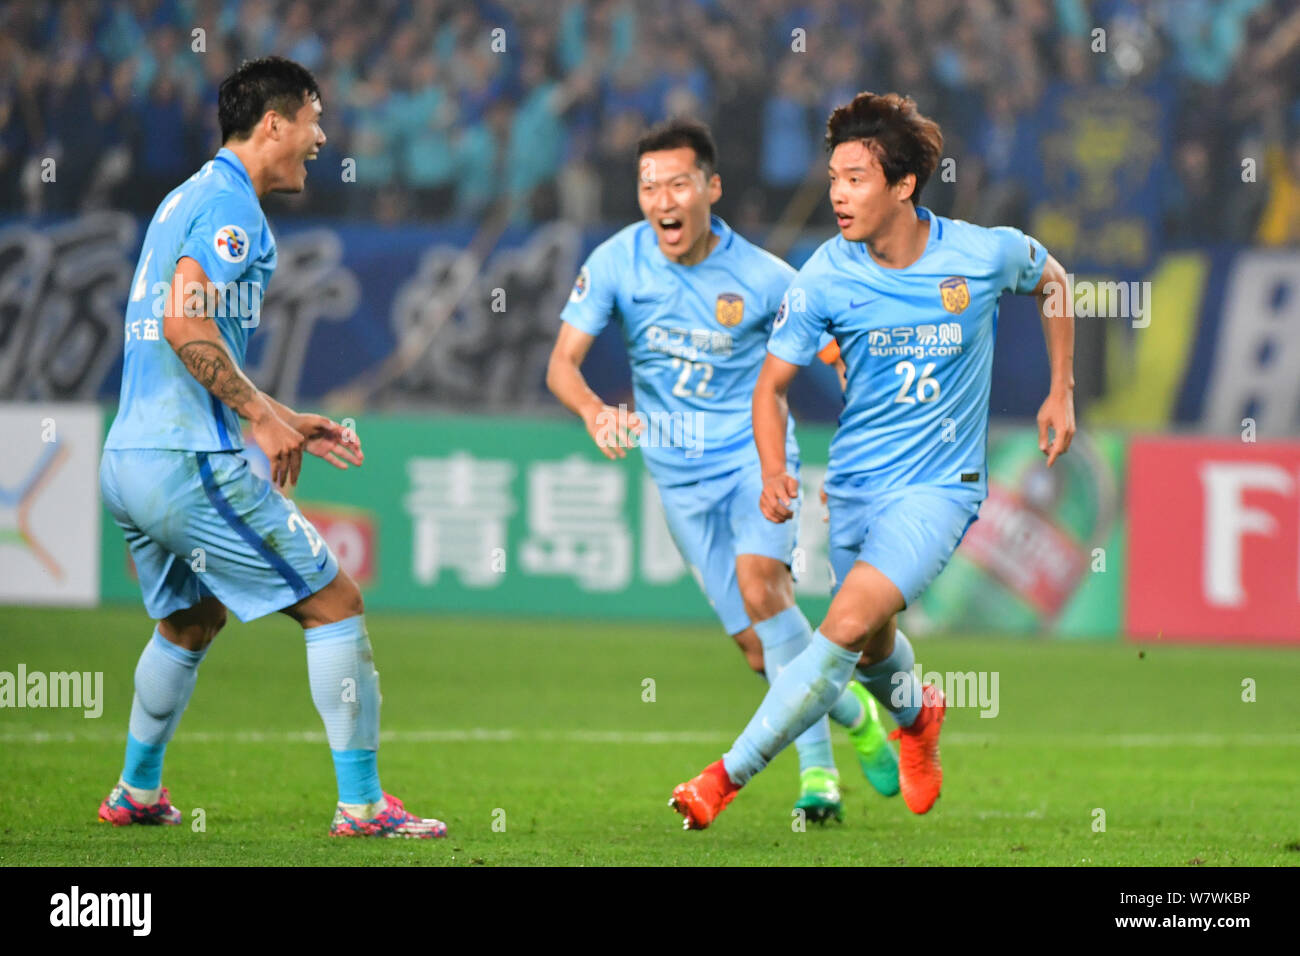 Hong Jeong-ho, right, and other players of China's Jiangsu Suning celebrate after scoring a goal against Japan's Gamba Osaka in their Group H match du Stock Photo